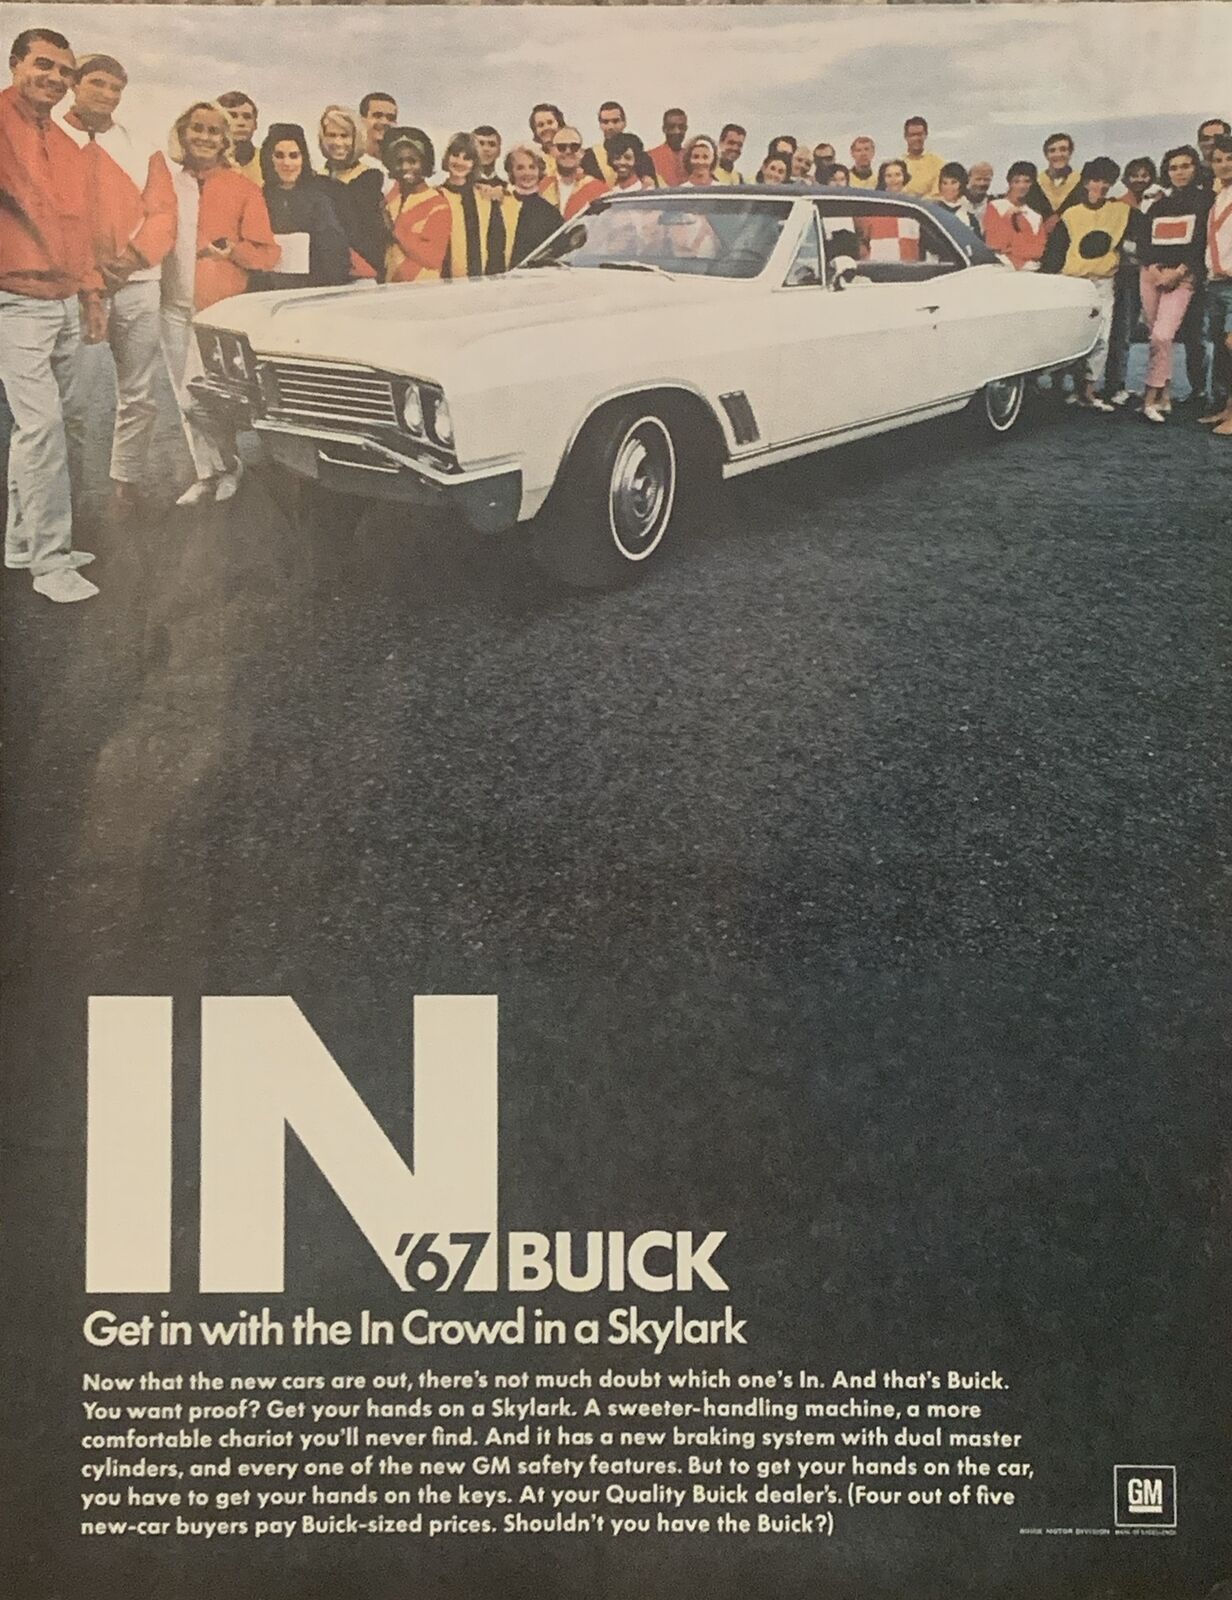 1967 Buick Skylark -Get In With The In Crowd VTG 60s PRINT AD General Motors GM